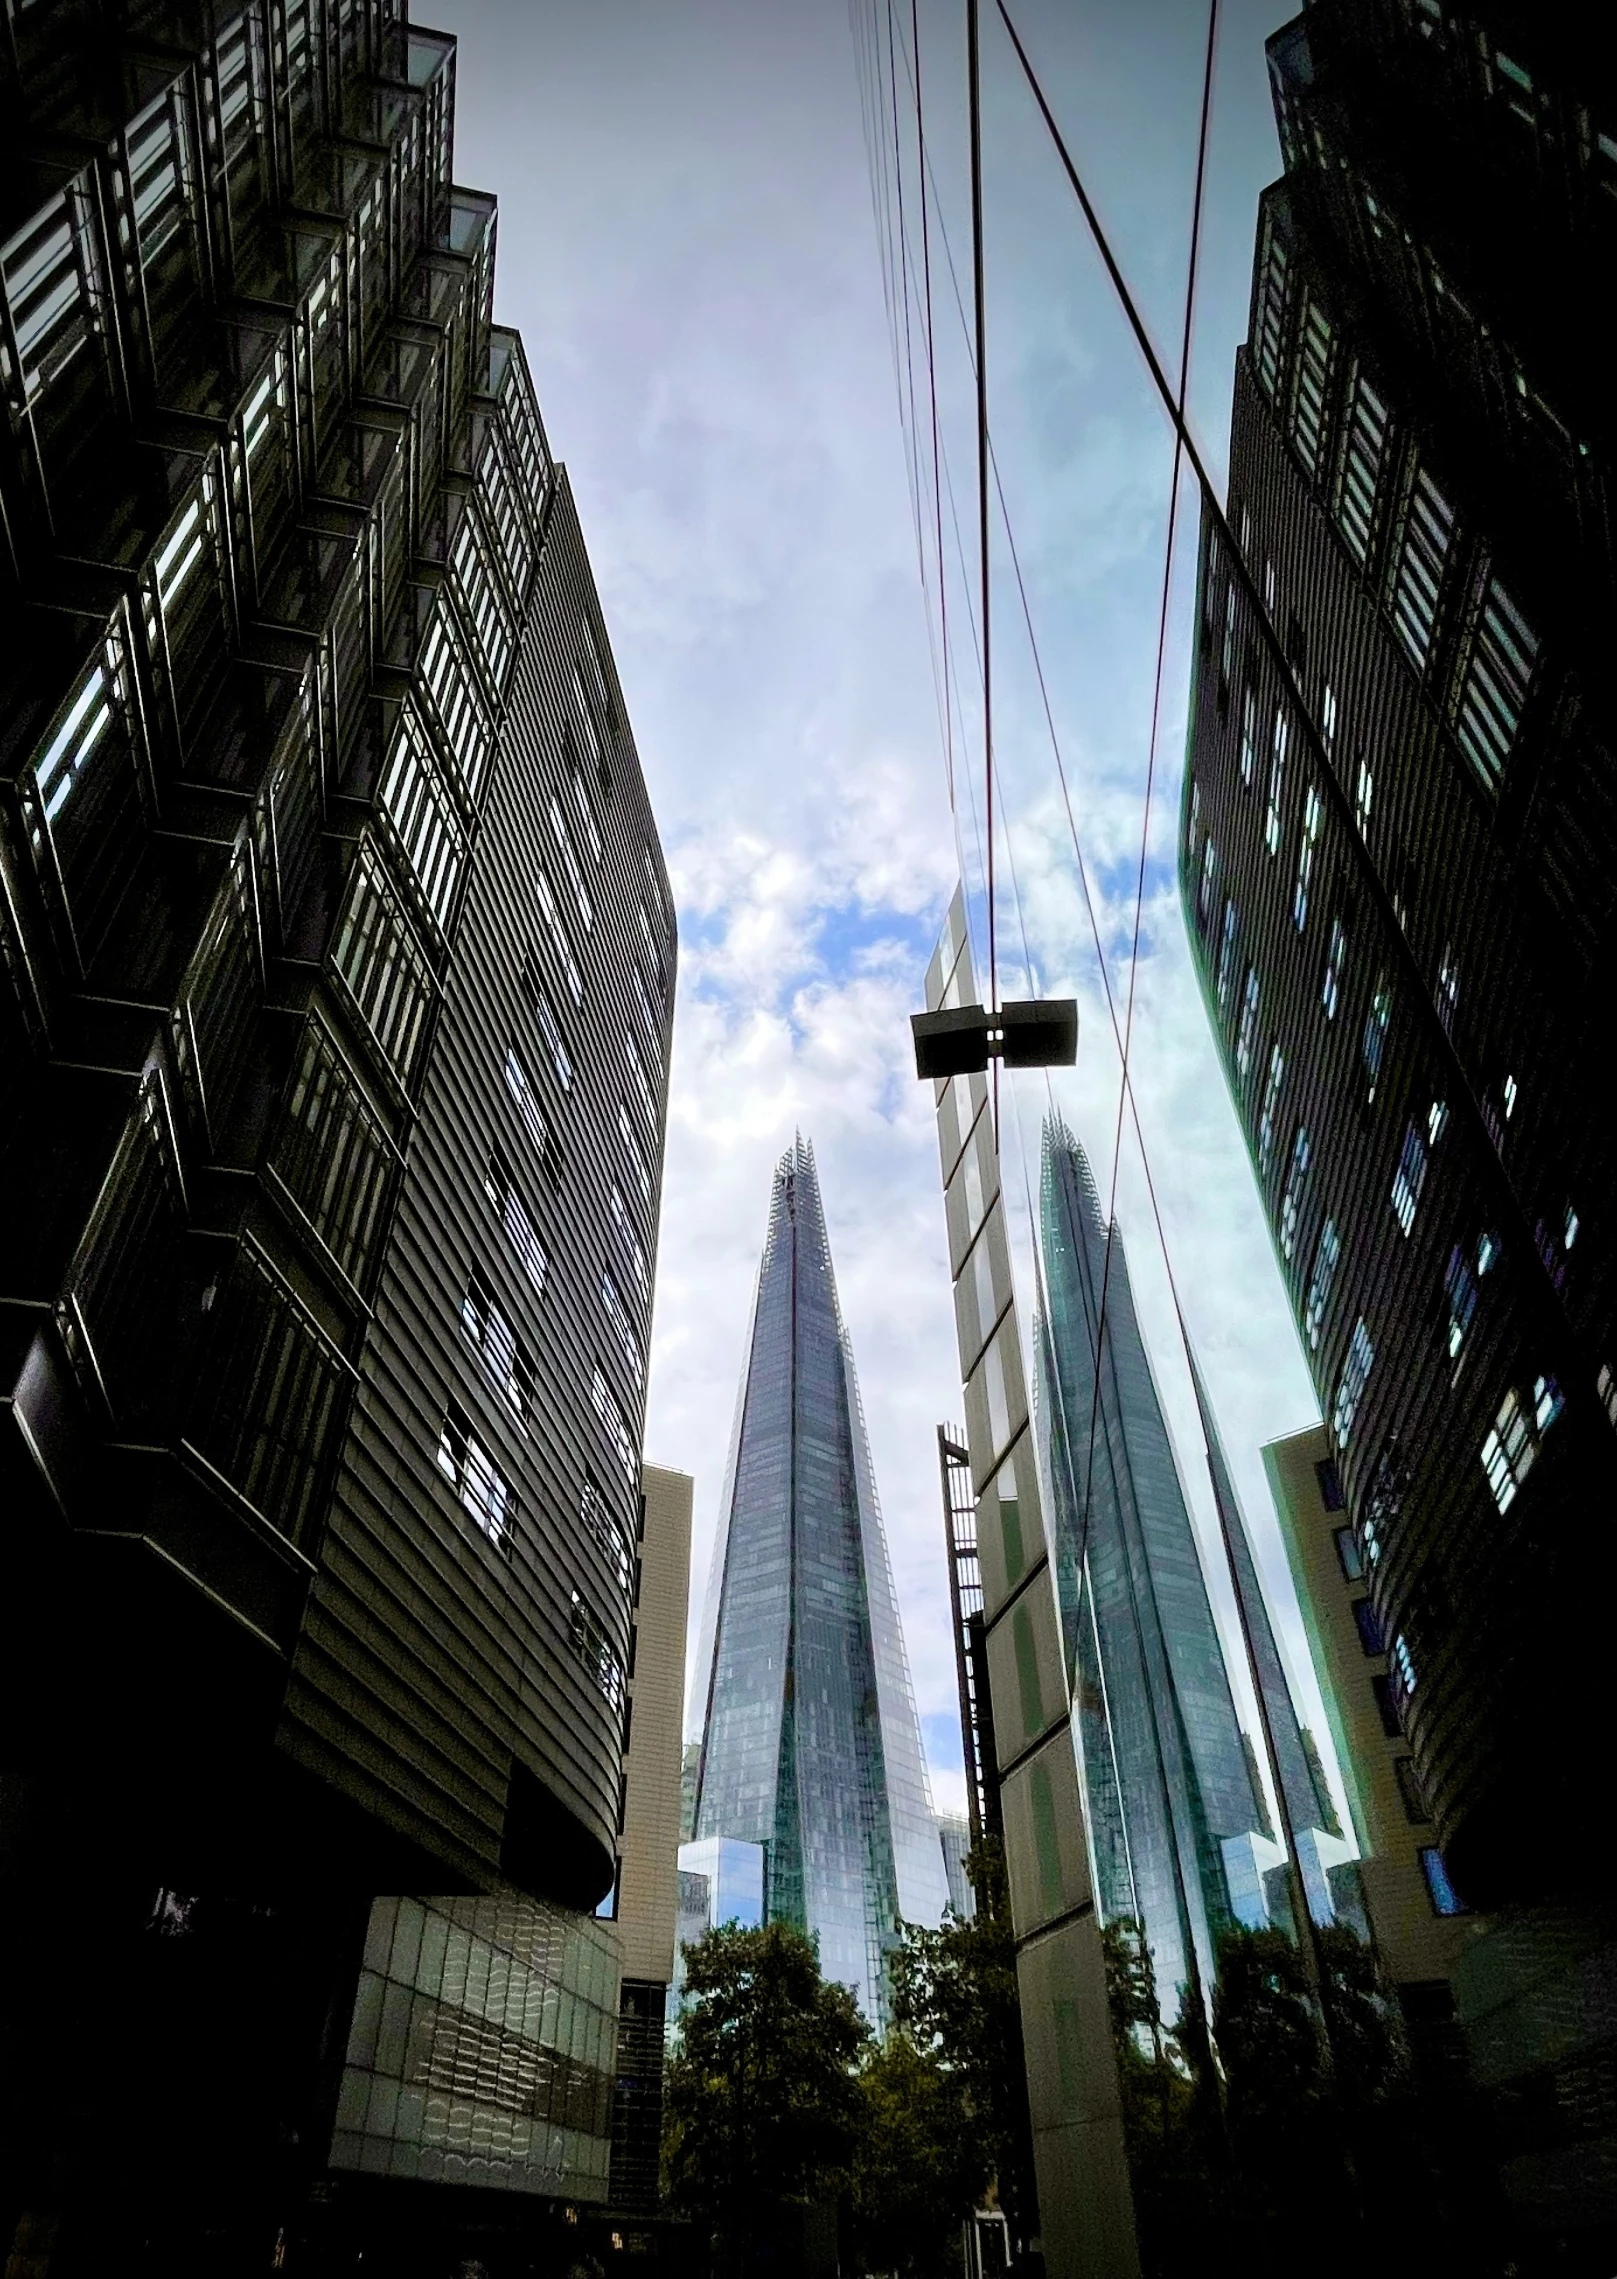 looking up at a group of tall skyscrs in the city